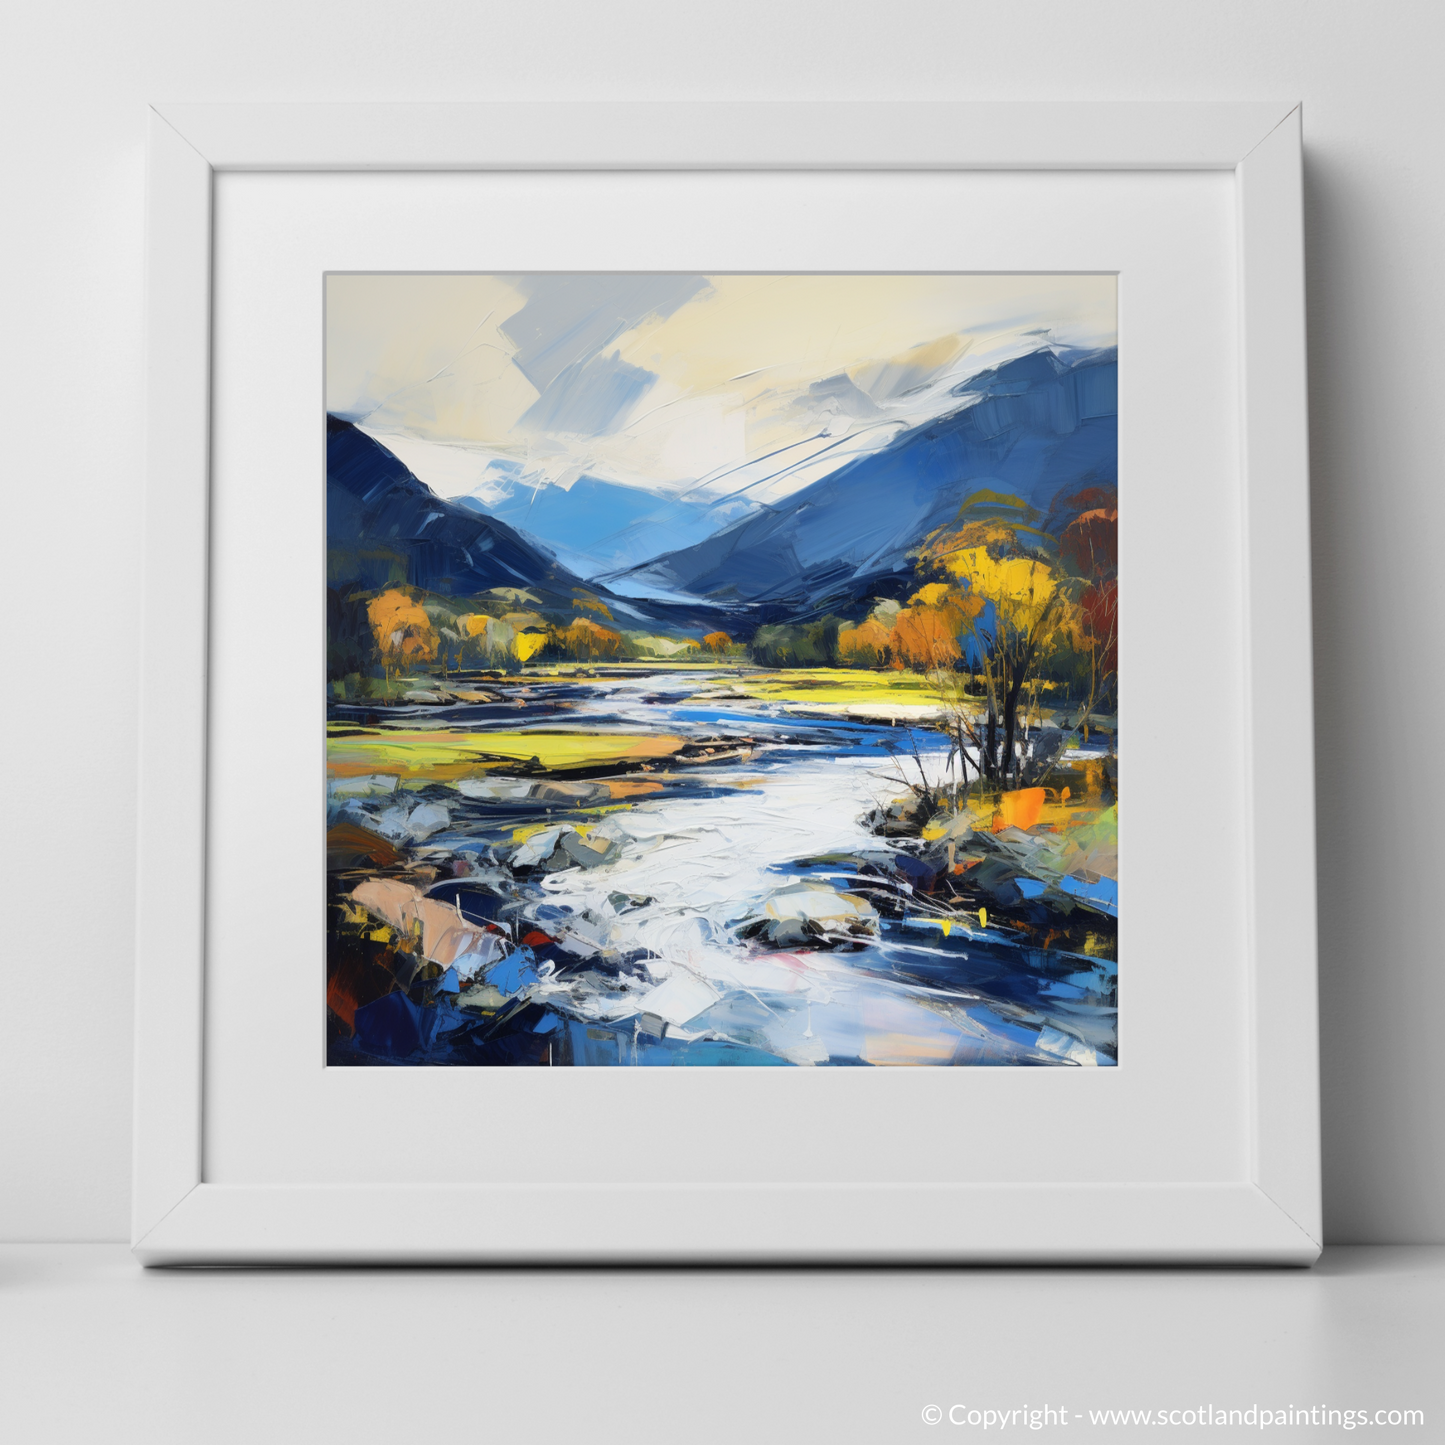 Art Print of River Spey, Highlands with a white frame